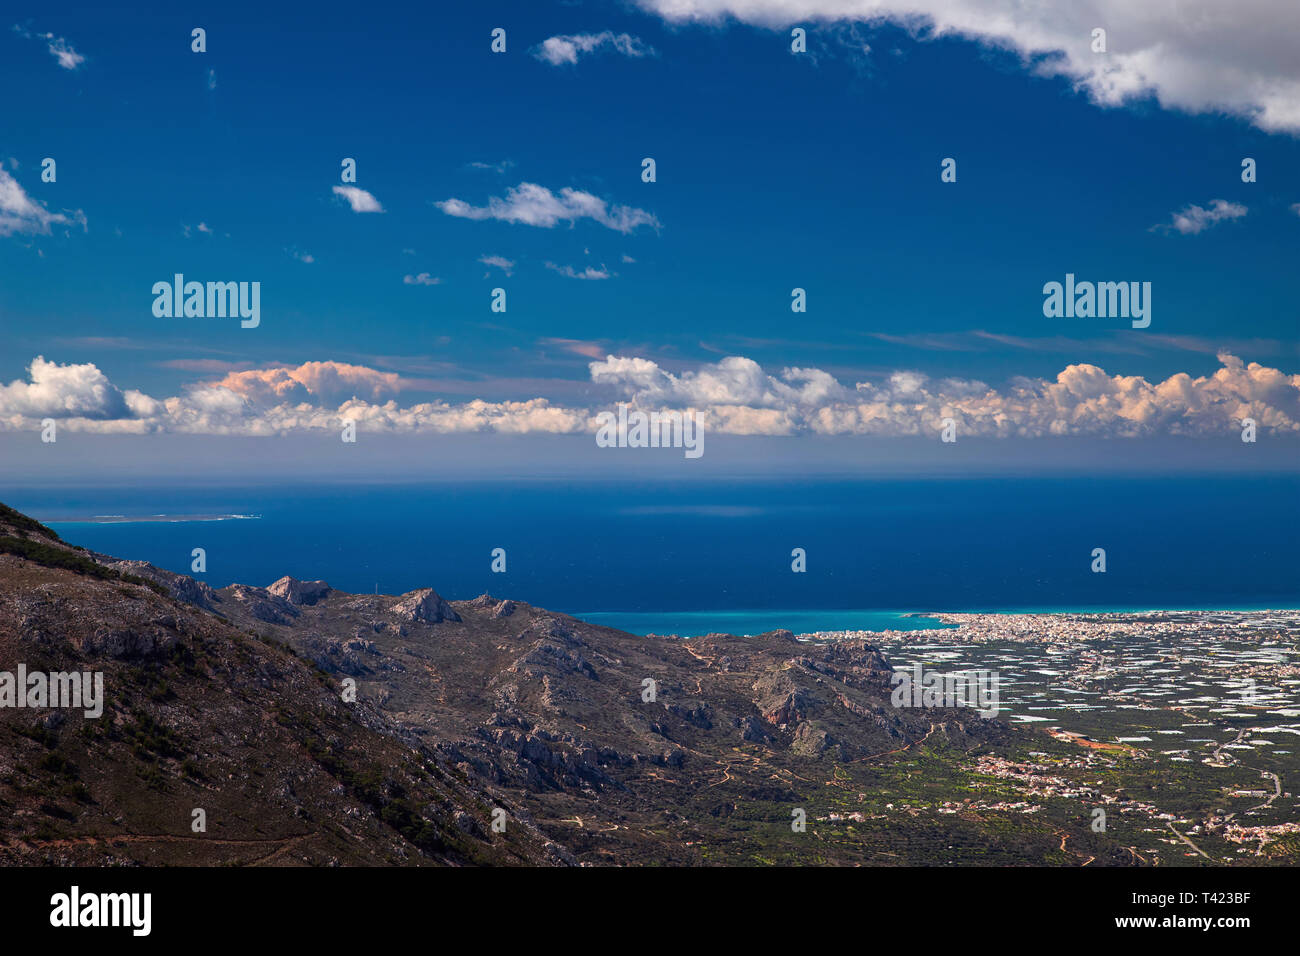 View of Ierapetra town and the Libyan sea from Thrypti mountain, Lassithi, Crete, Greece. Stock Photo